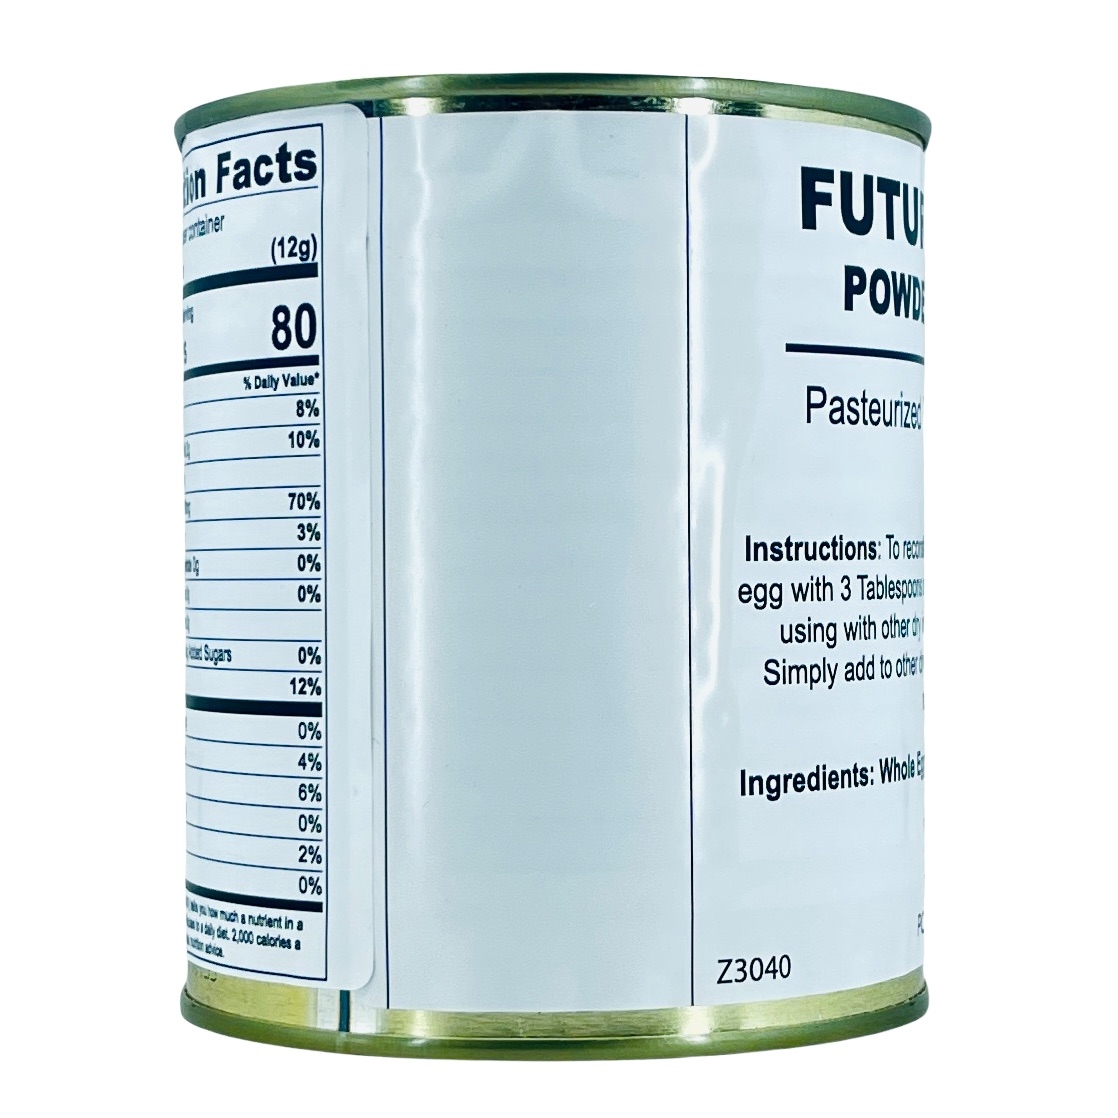 Instant Potato Flakes by Future Essentials (Case of 6 cans) - #10 Sizes Can